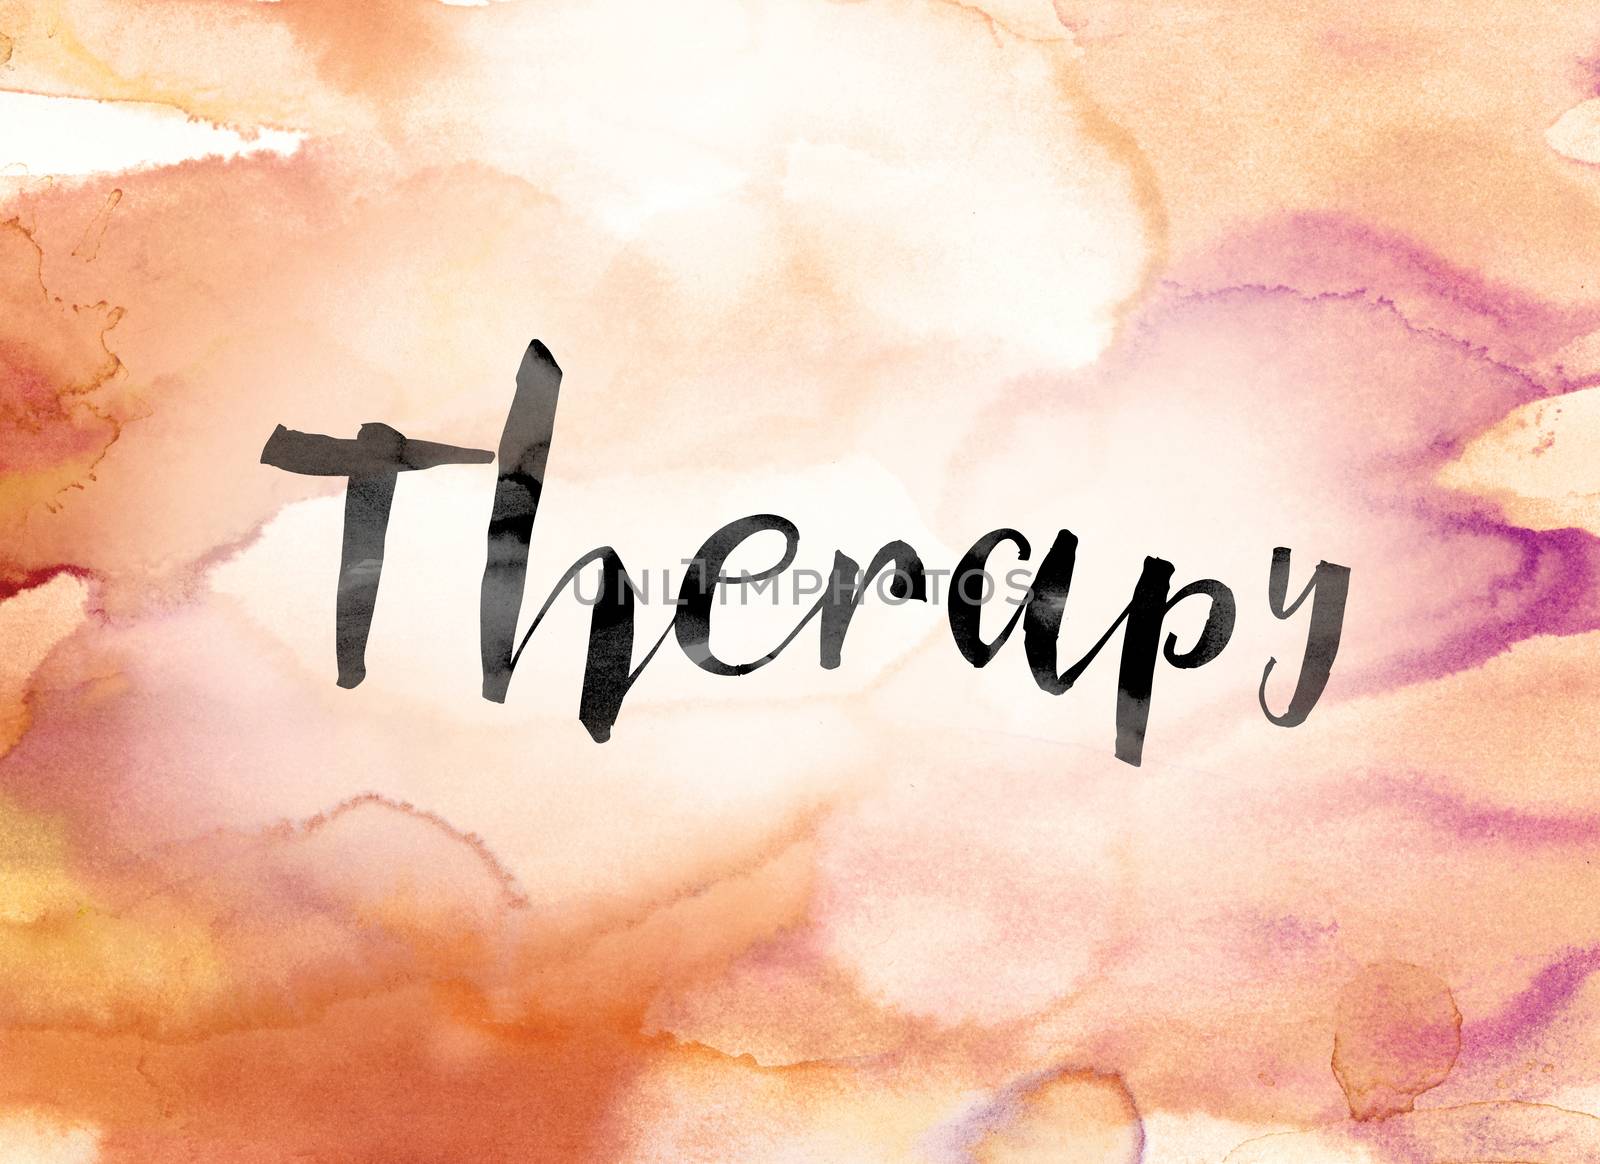 The word "Therapy" painted in black ink over a colorful watercolor washed background concept and theme.